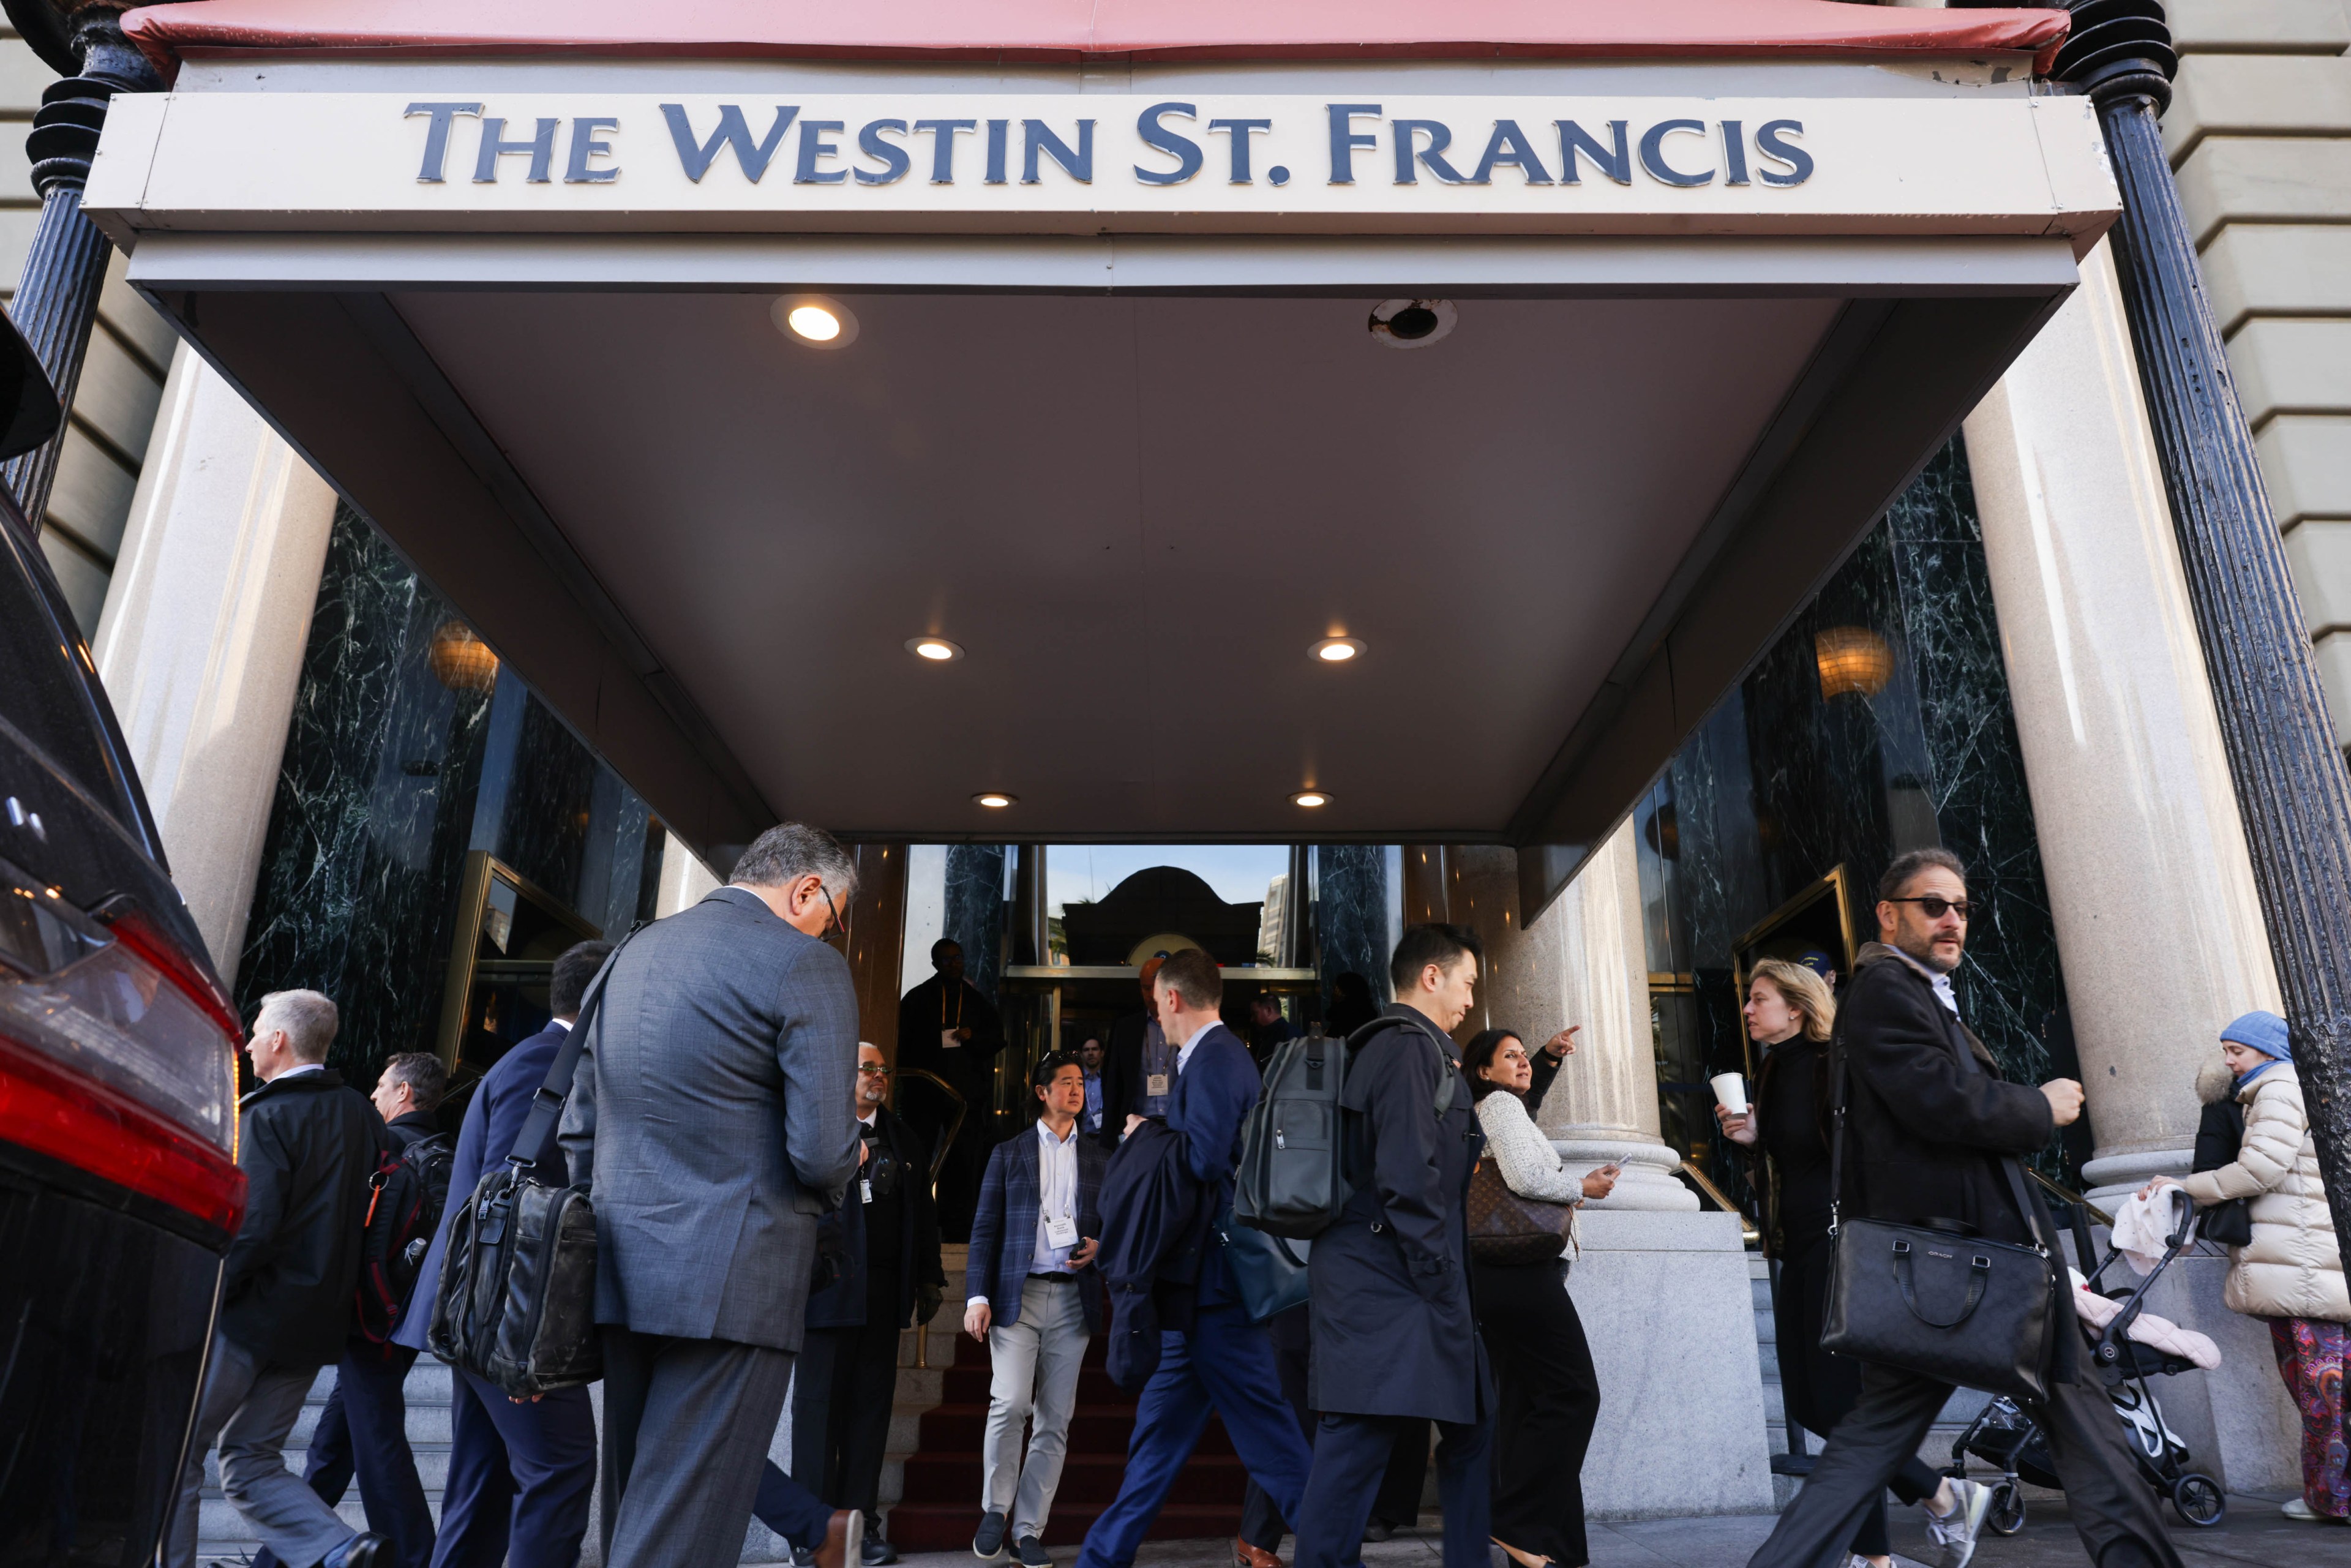 People walking in and out of the entrance of The Westin St. Francis hotel.